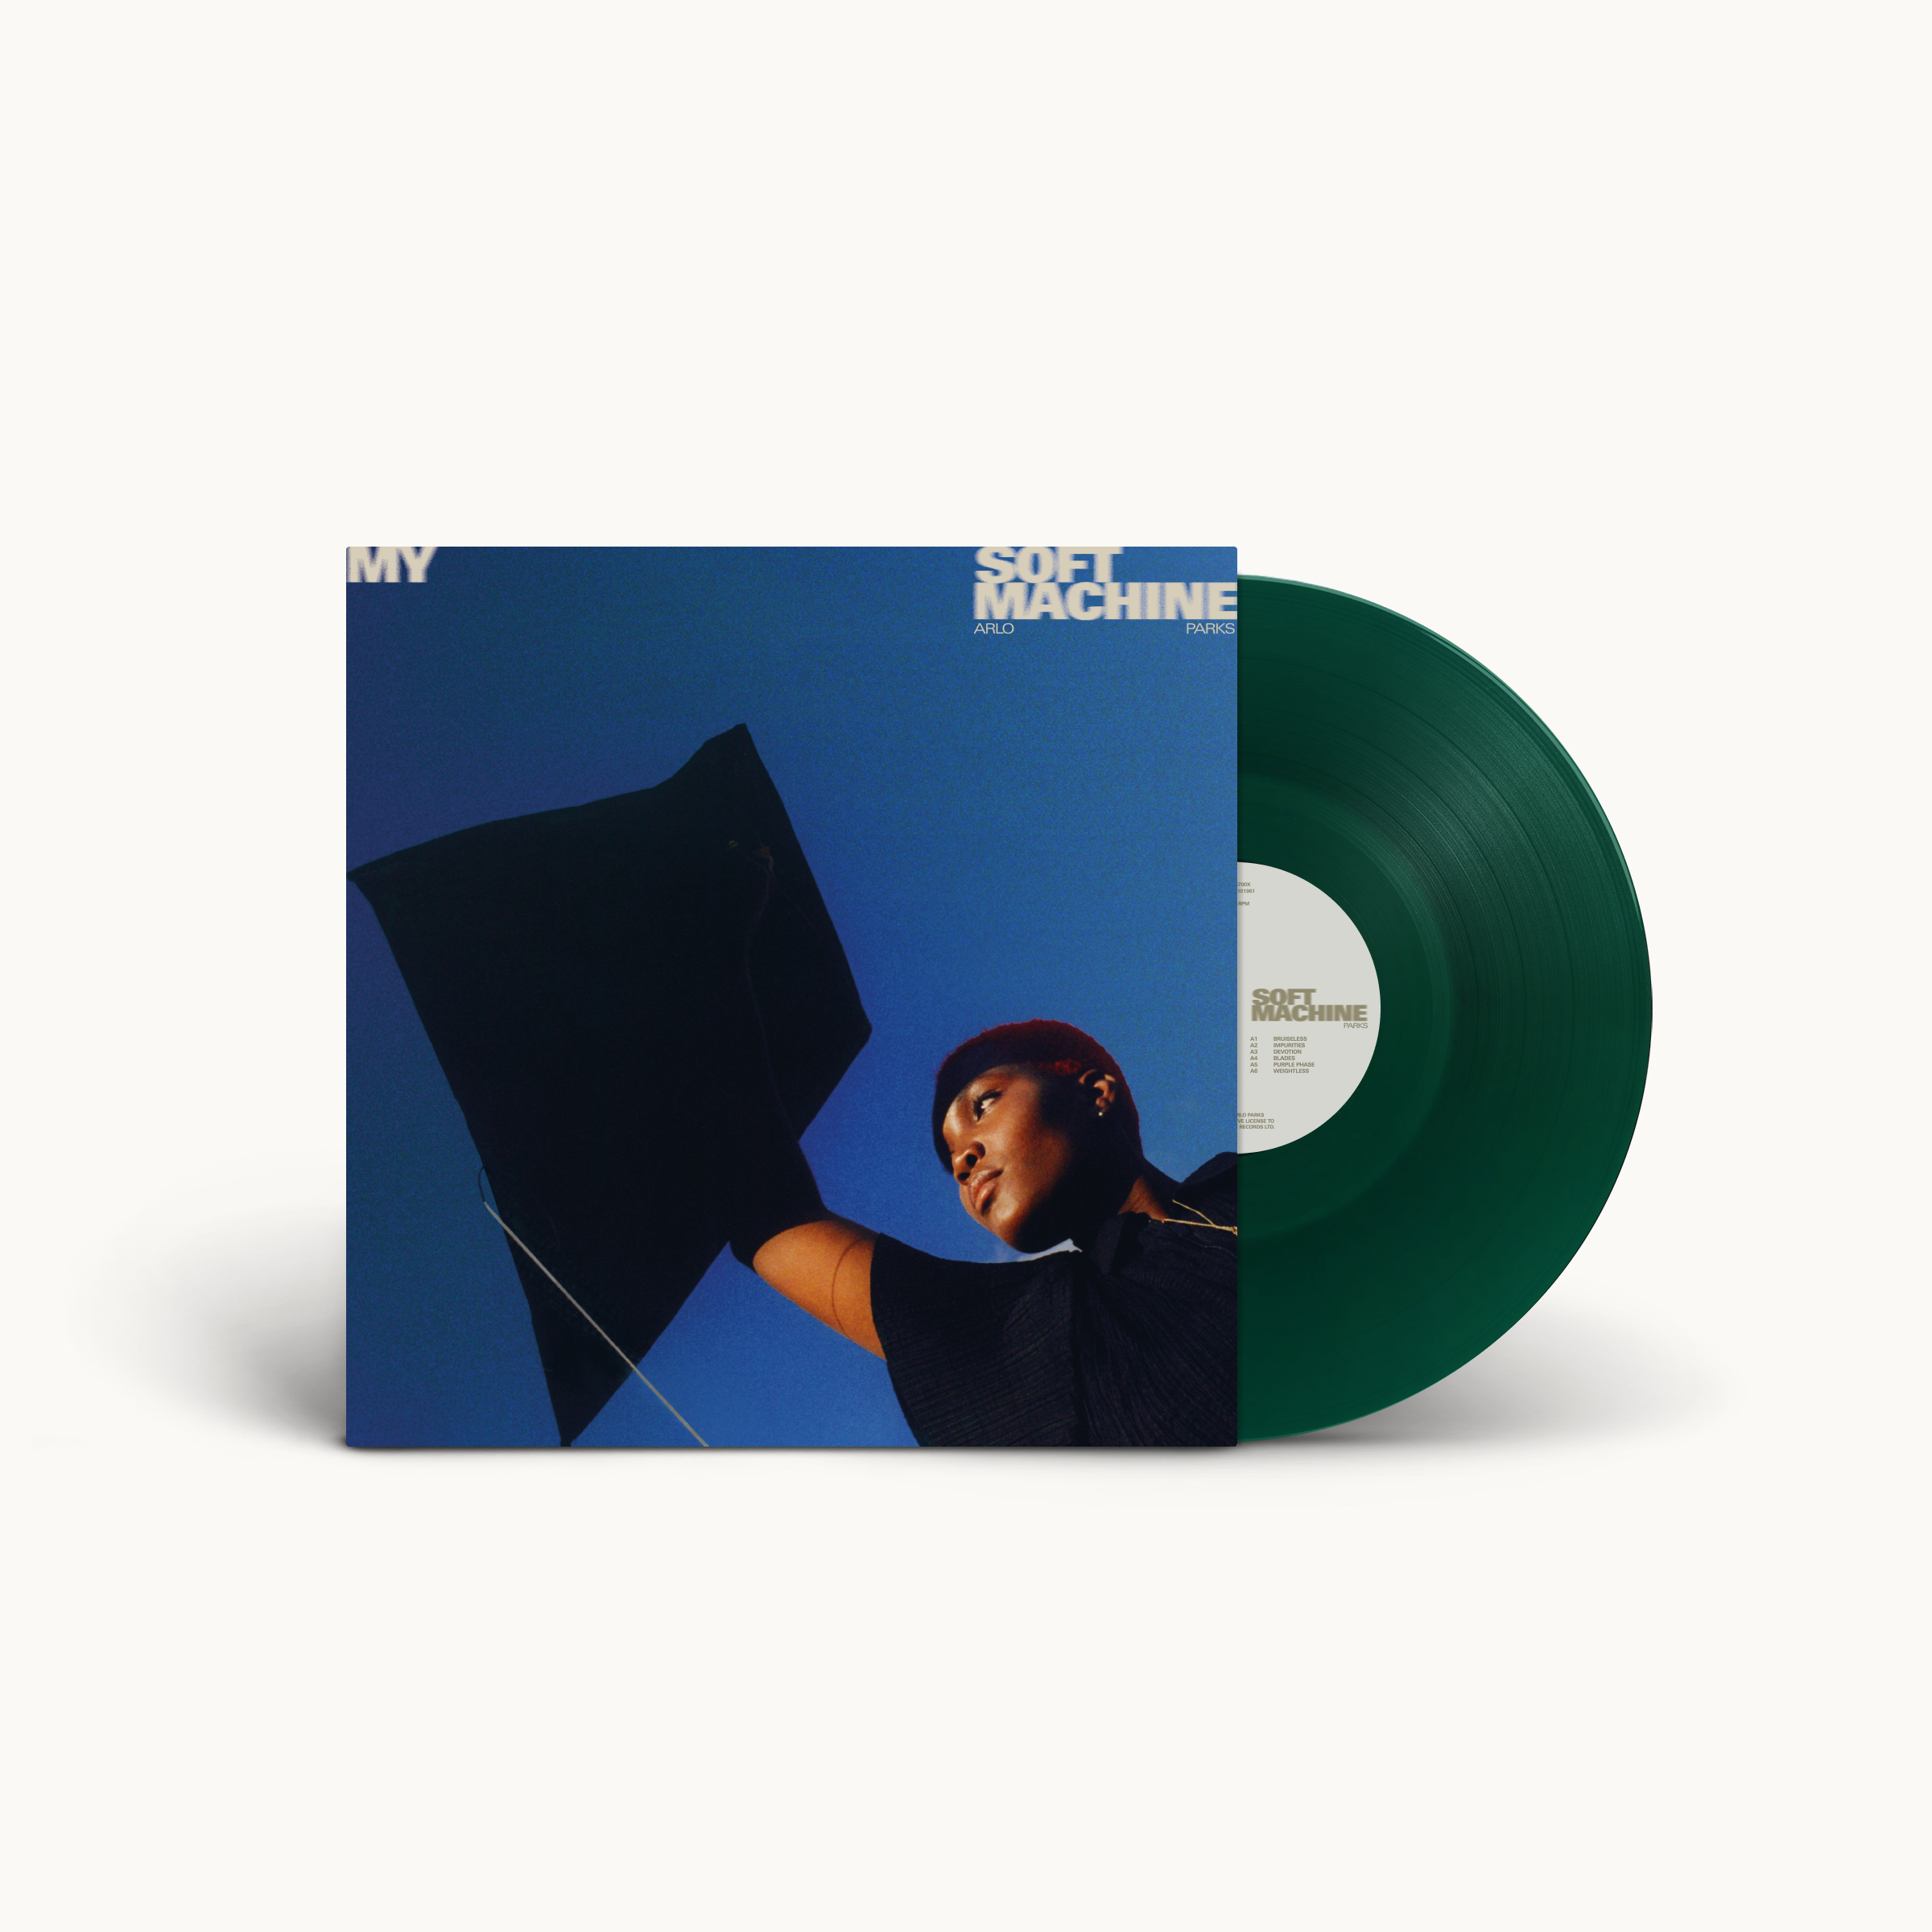 My Soft Machine: Limited Green Vinyl LP, The Magic Boarder (Hardback Book) + Exclusive Signed Print